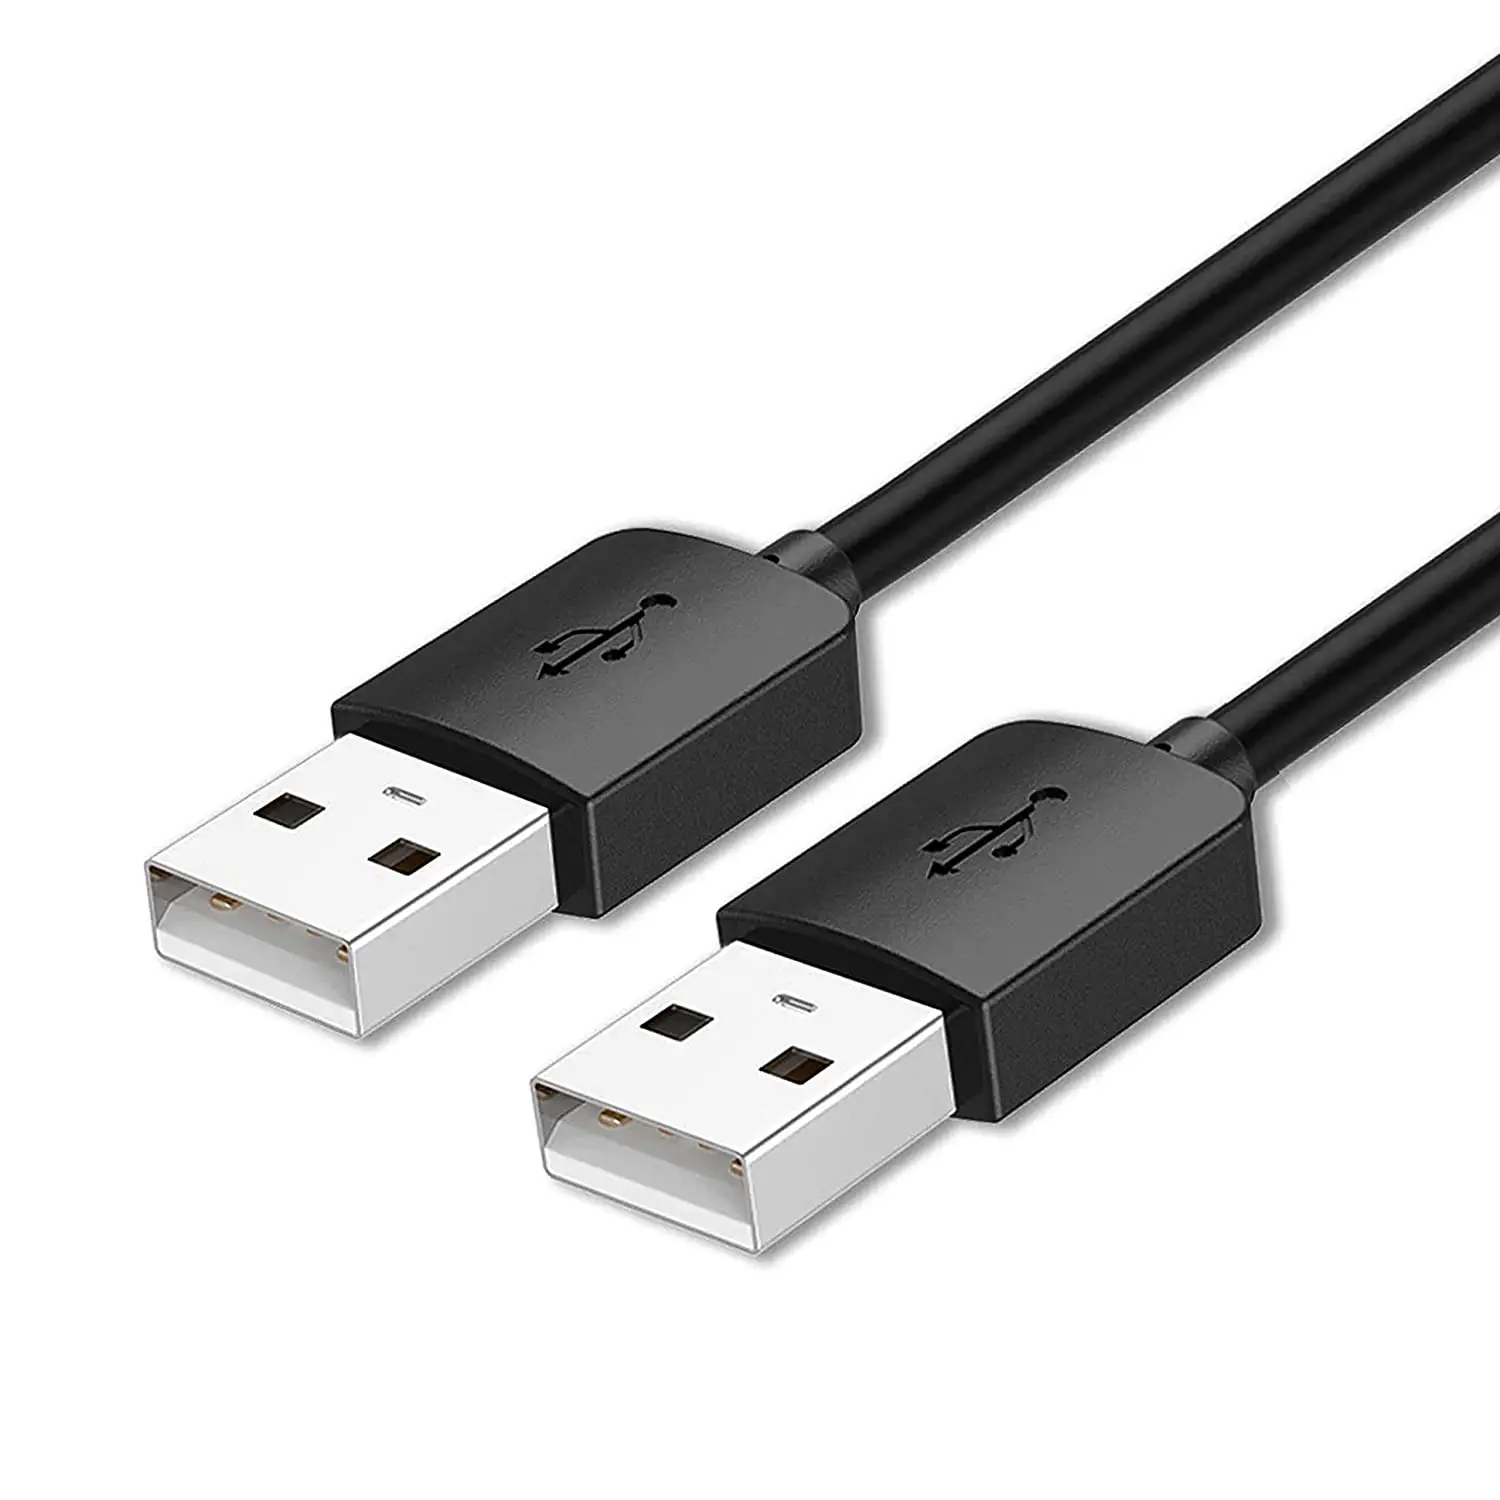 USB cable 2.0 Type A to A 3M data transmitting extension cable